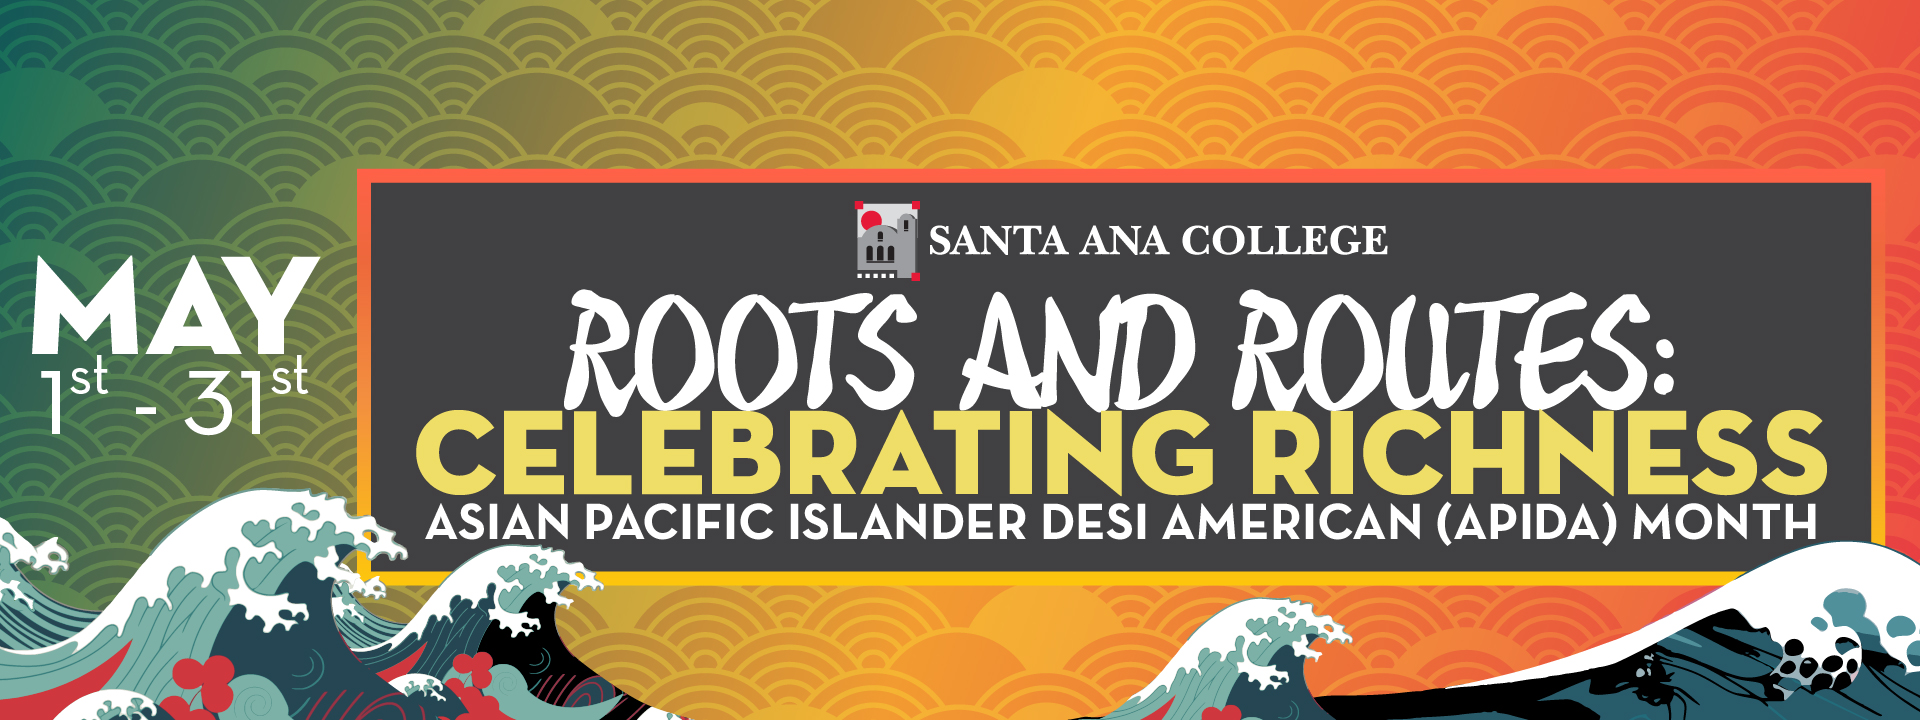 Roots and Routes: Celebrating Richness